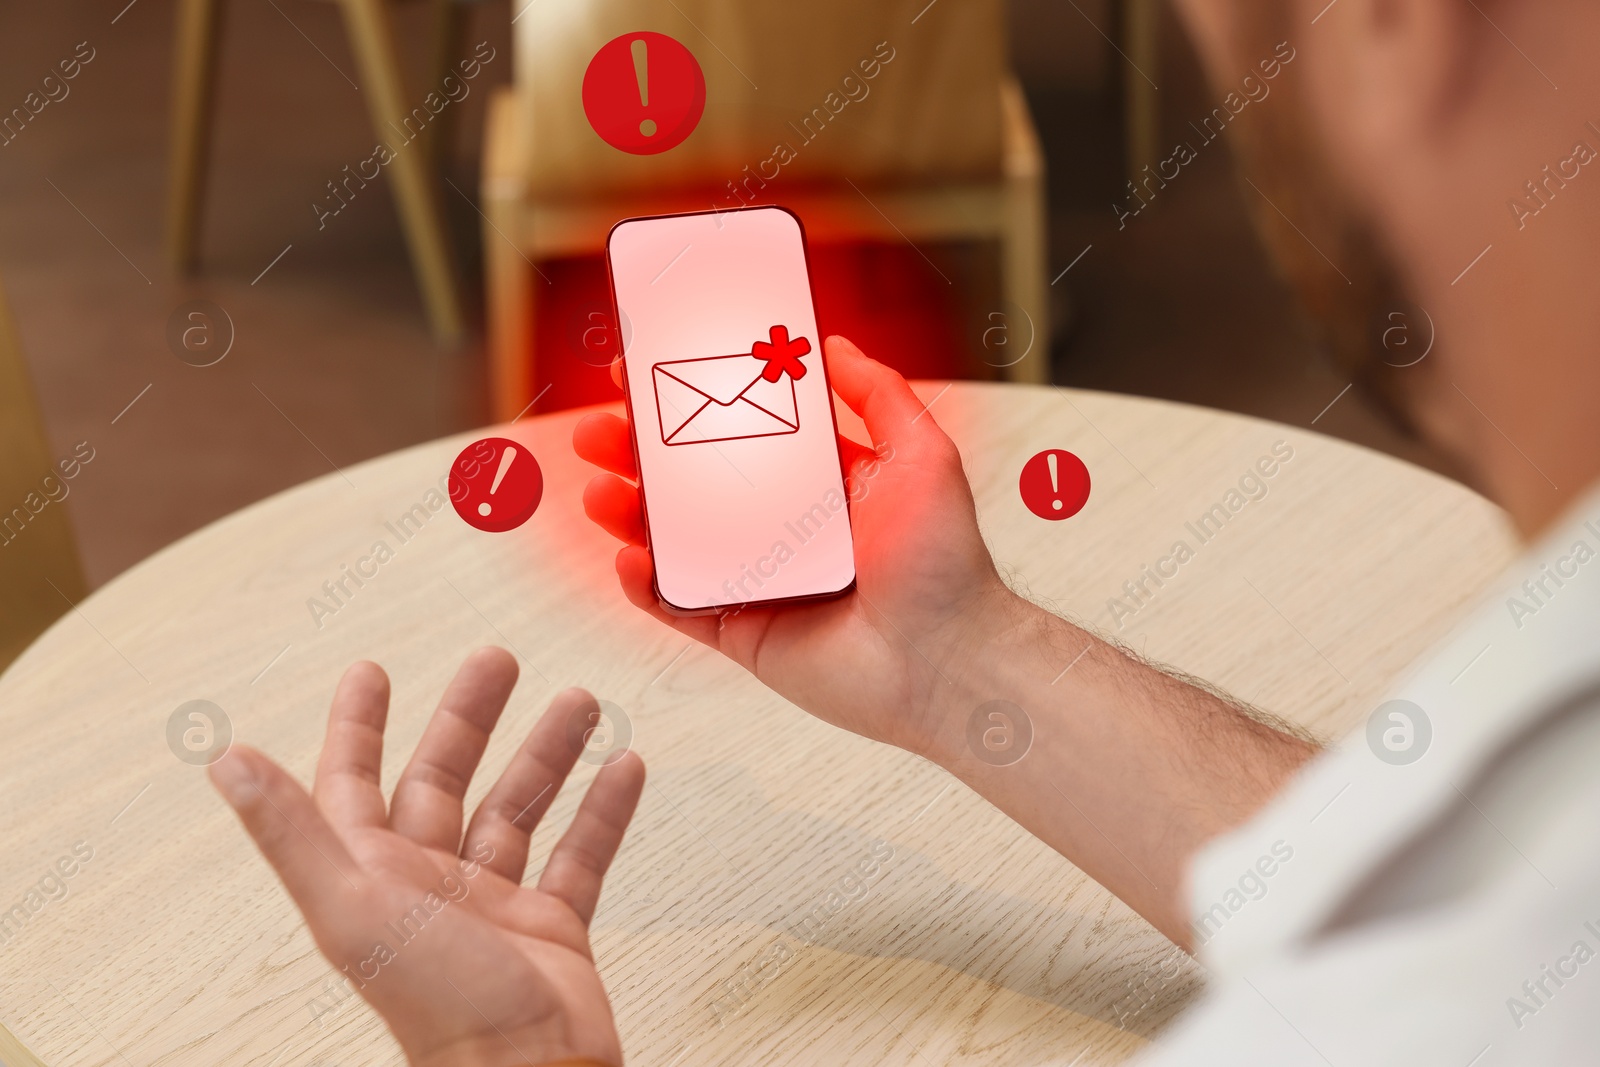 Image of Man using smartphone at table indoors, closeup. Spam message notification on device screen, illustration